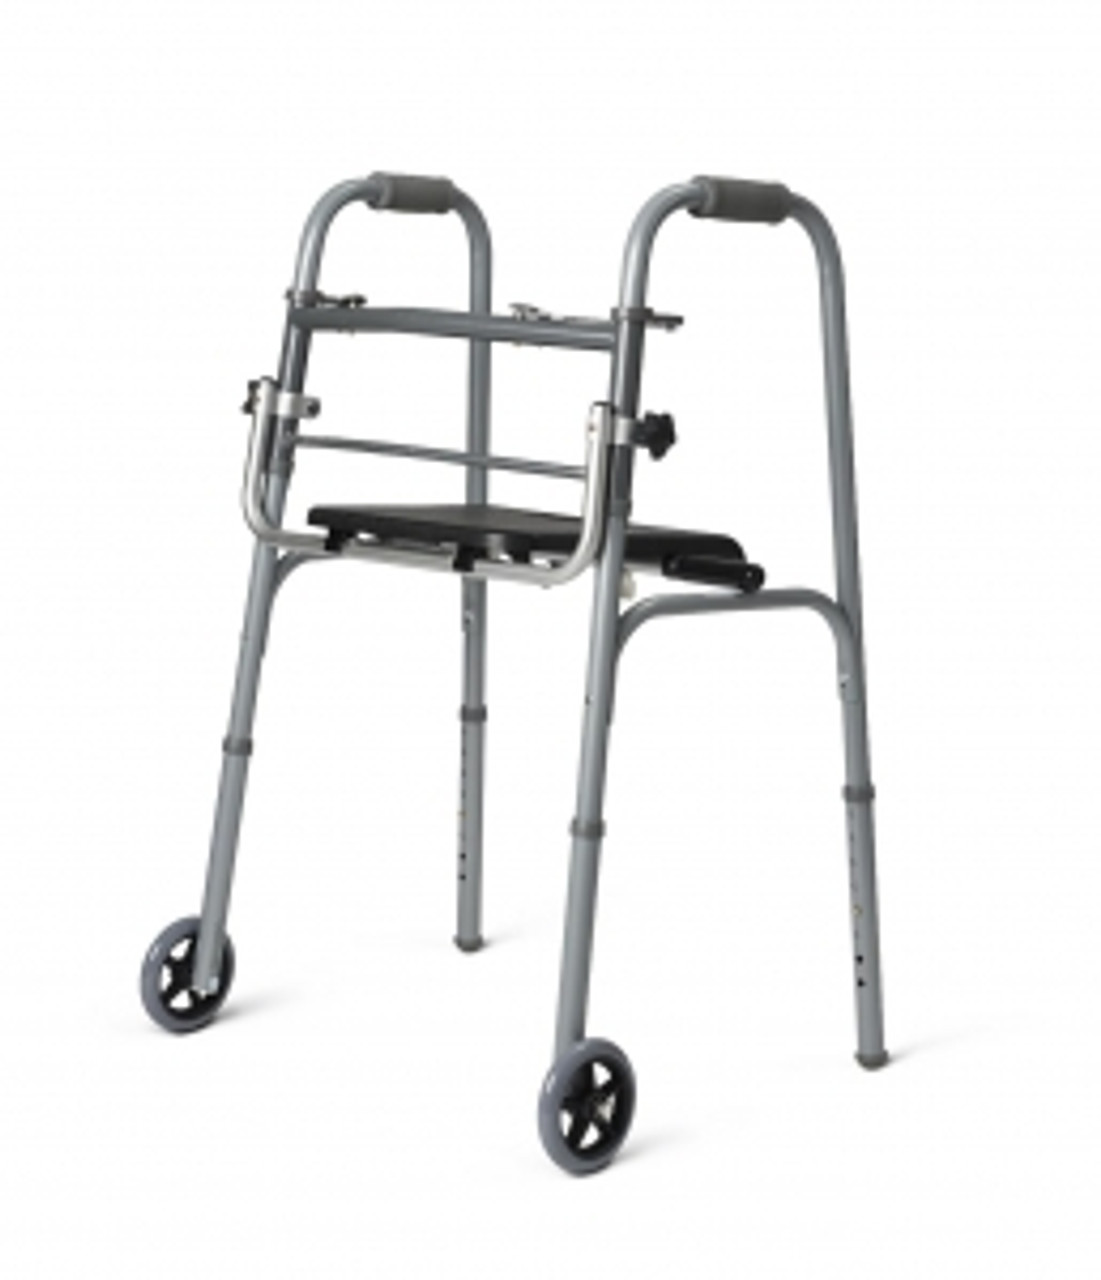 Removable seat attaches to most model walkers (except extra-wide ones such as the GO7767 and GO7768) and lets the user convert the walker to a portable chair
Folds down out of the way for storage
Works with foldable walkers